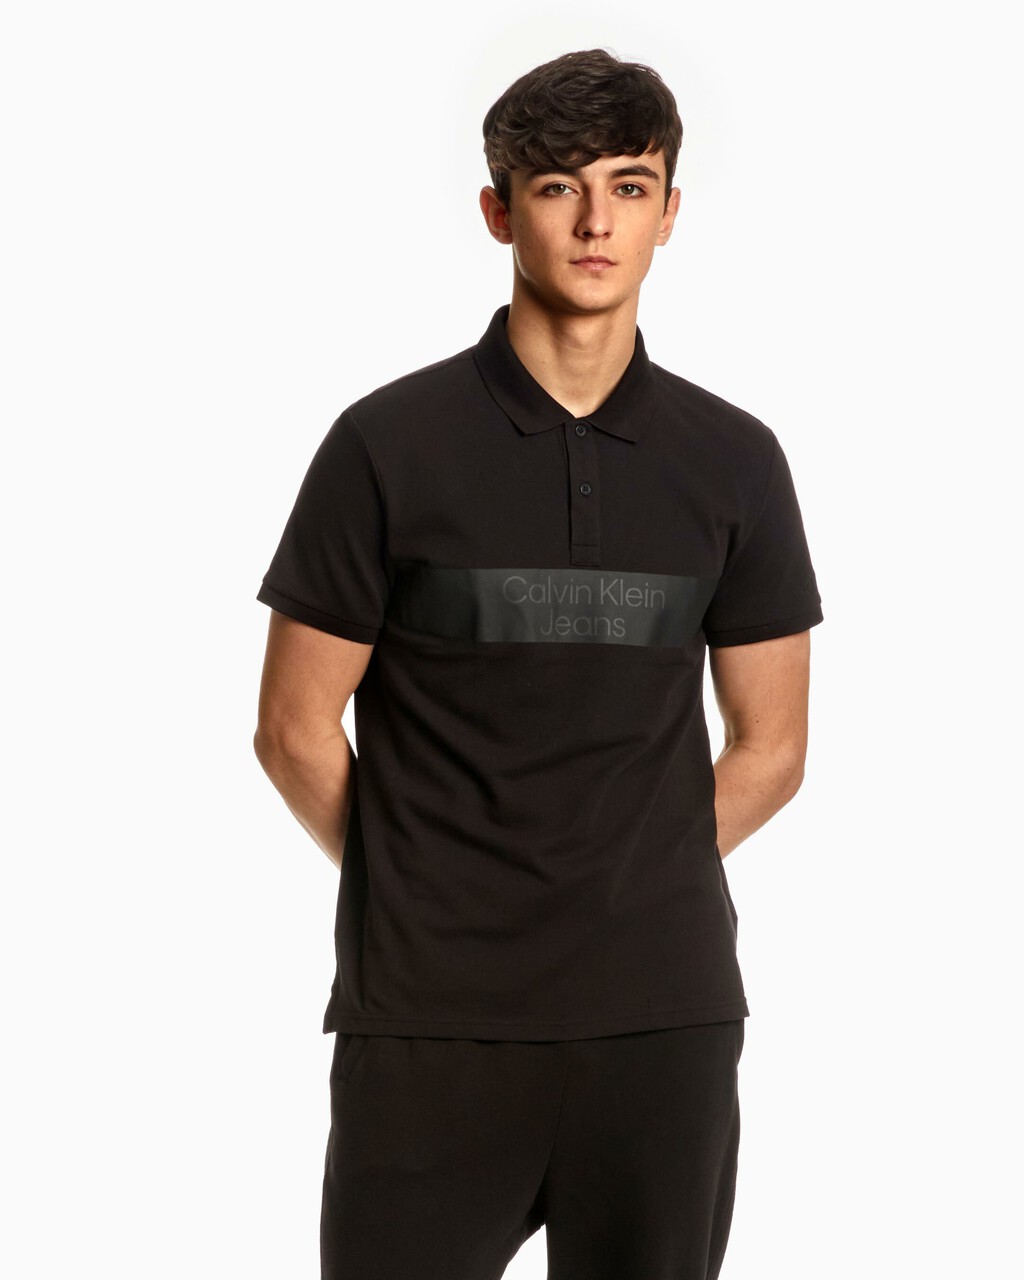 GLOW IN THE DARK INSTITUTIONAL POLO, Ck Black, hi-res